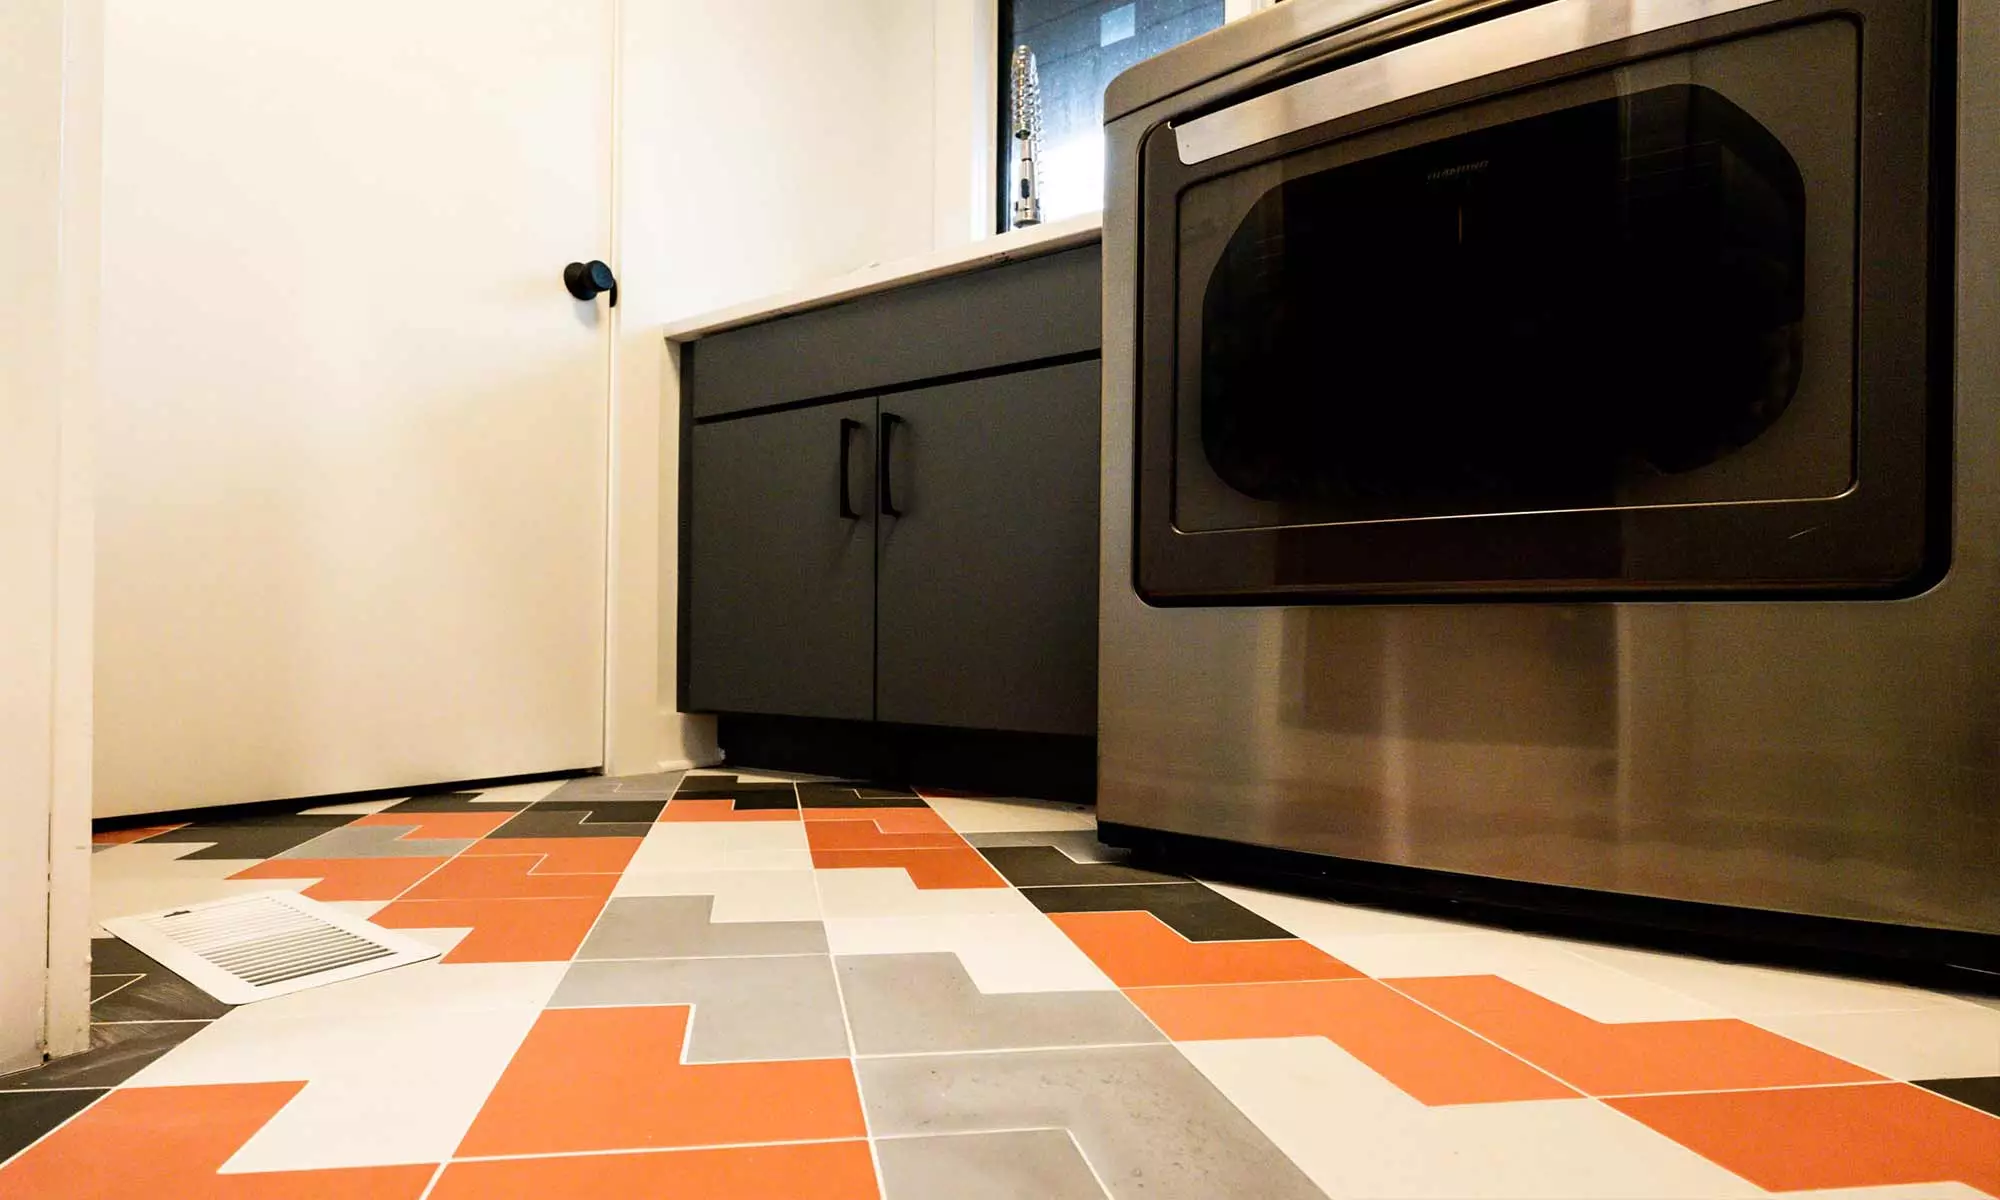 textured laundry room tile in grey orange black and white